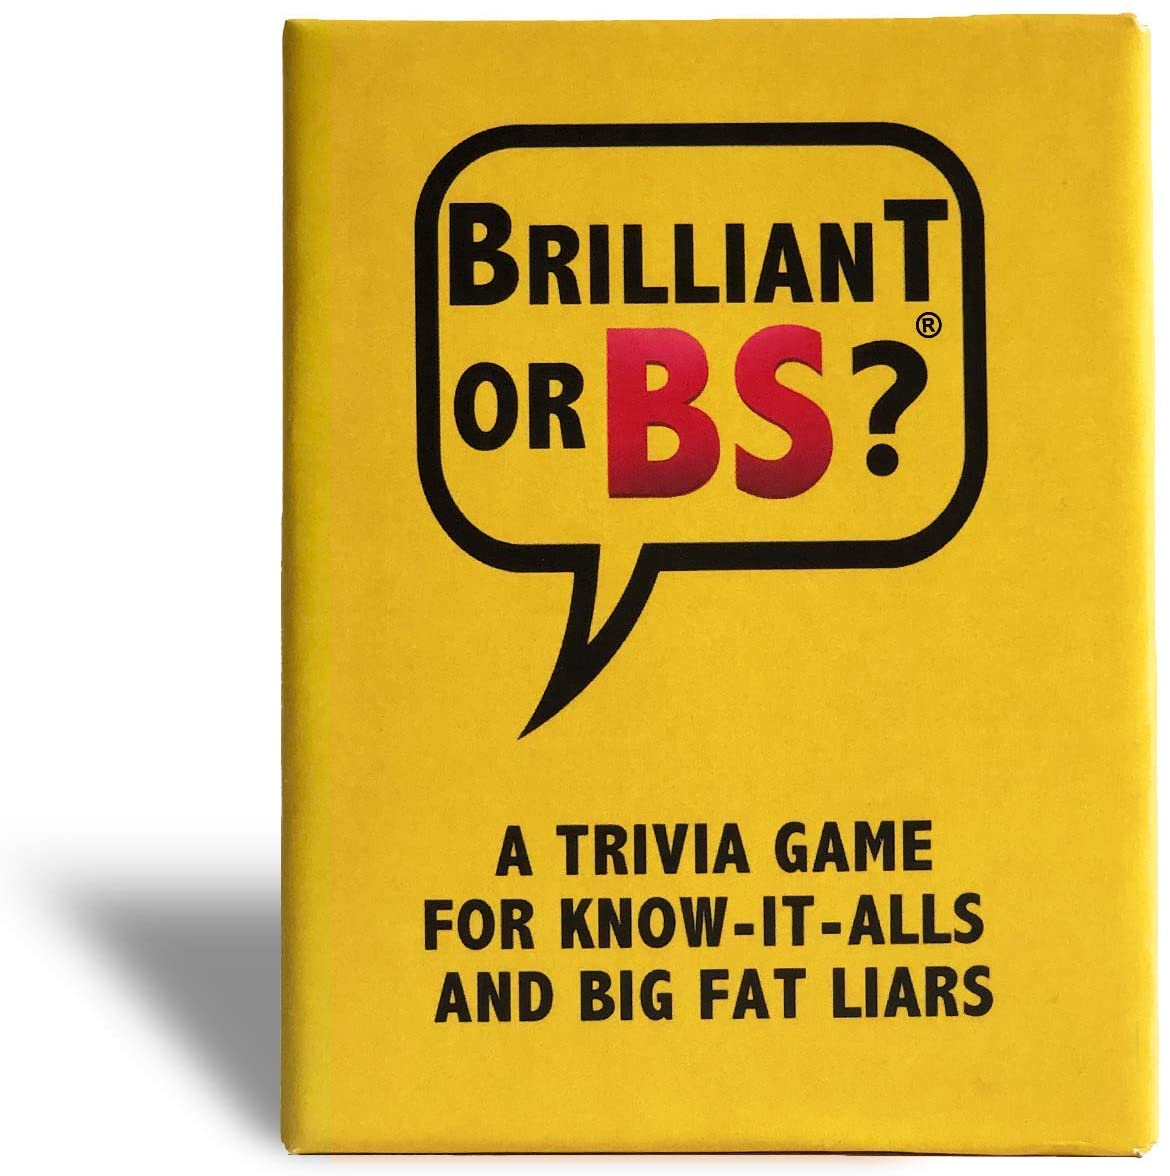 Brilliant or BS? - A Trivia Party Game for Know-It-Alls and Big Fat Liars